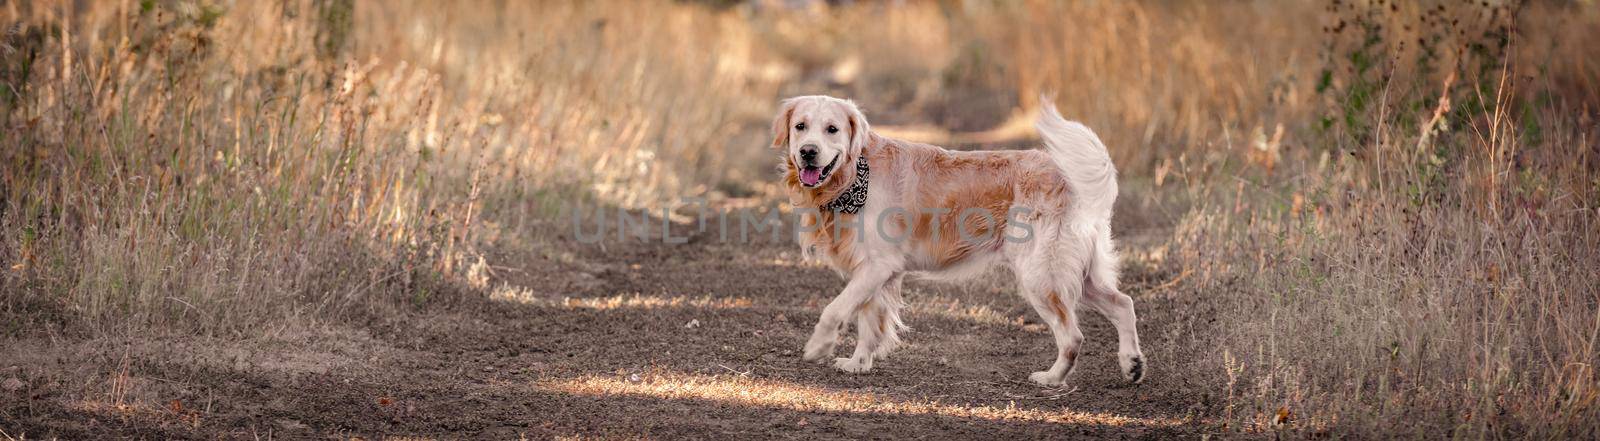 Golden retriever dog wearing neck scarf in autumn yellow grass. Purebred pet labrador walking outdoors in nature